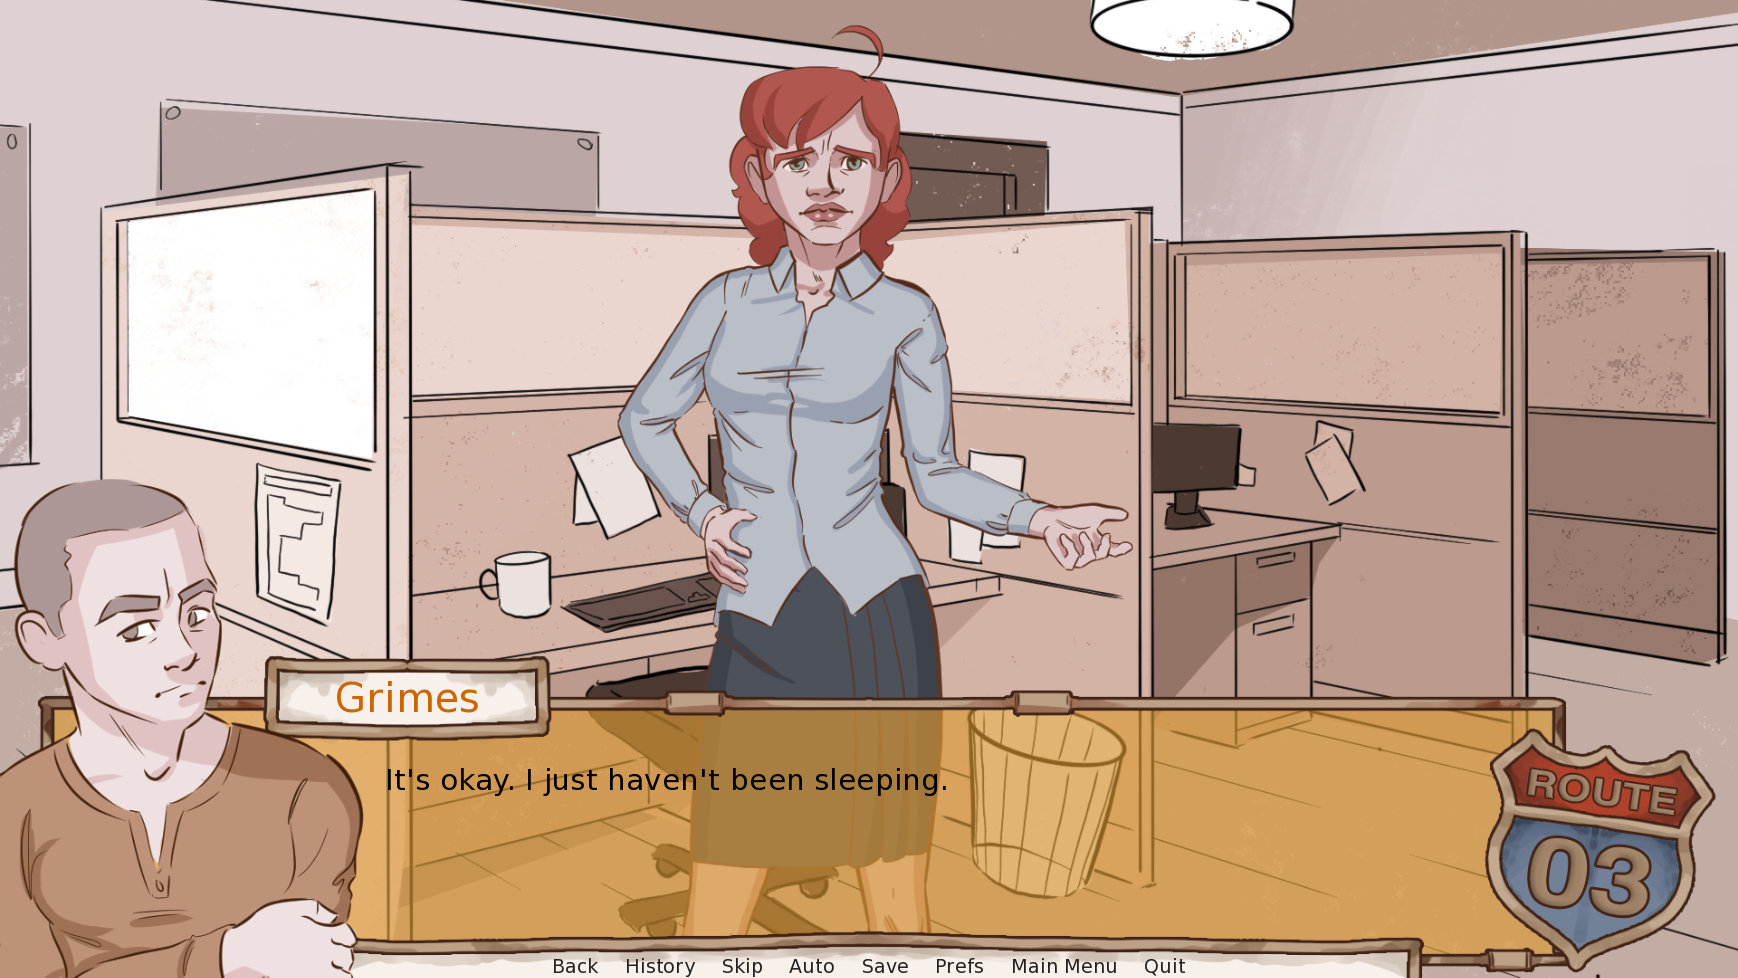 A feminine figure stands in the background. A masculine character sits beside a text box. 'Grimes' says 'It's okay, I just haven't been sleeping.'